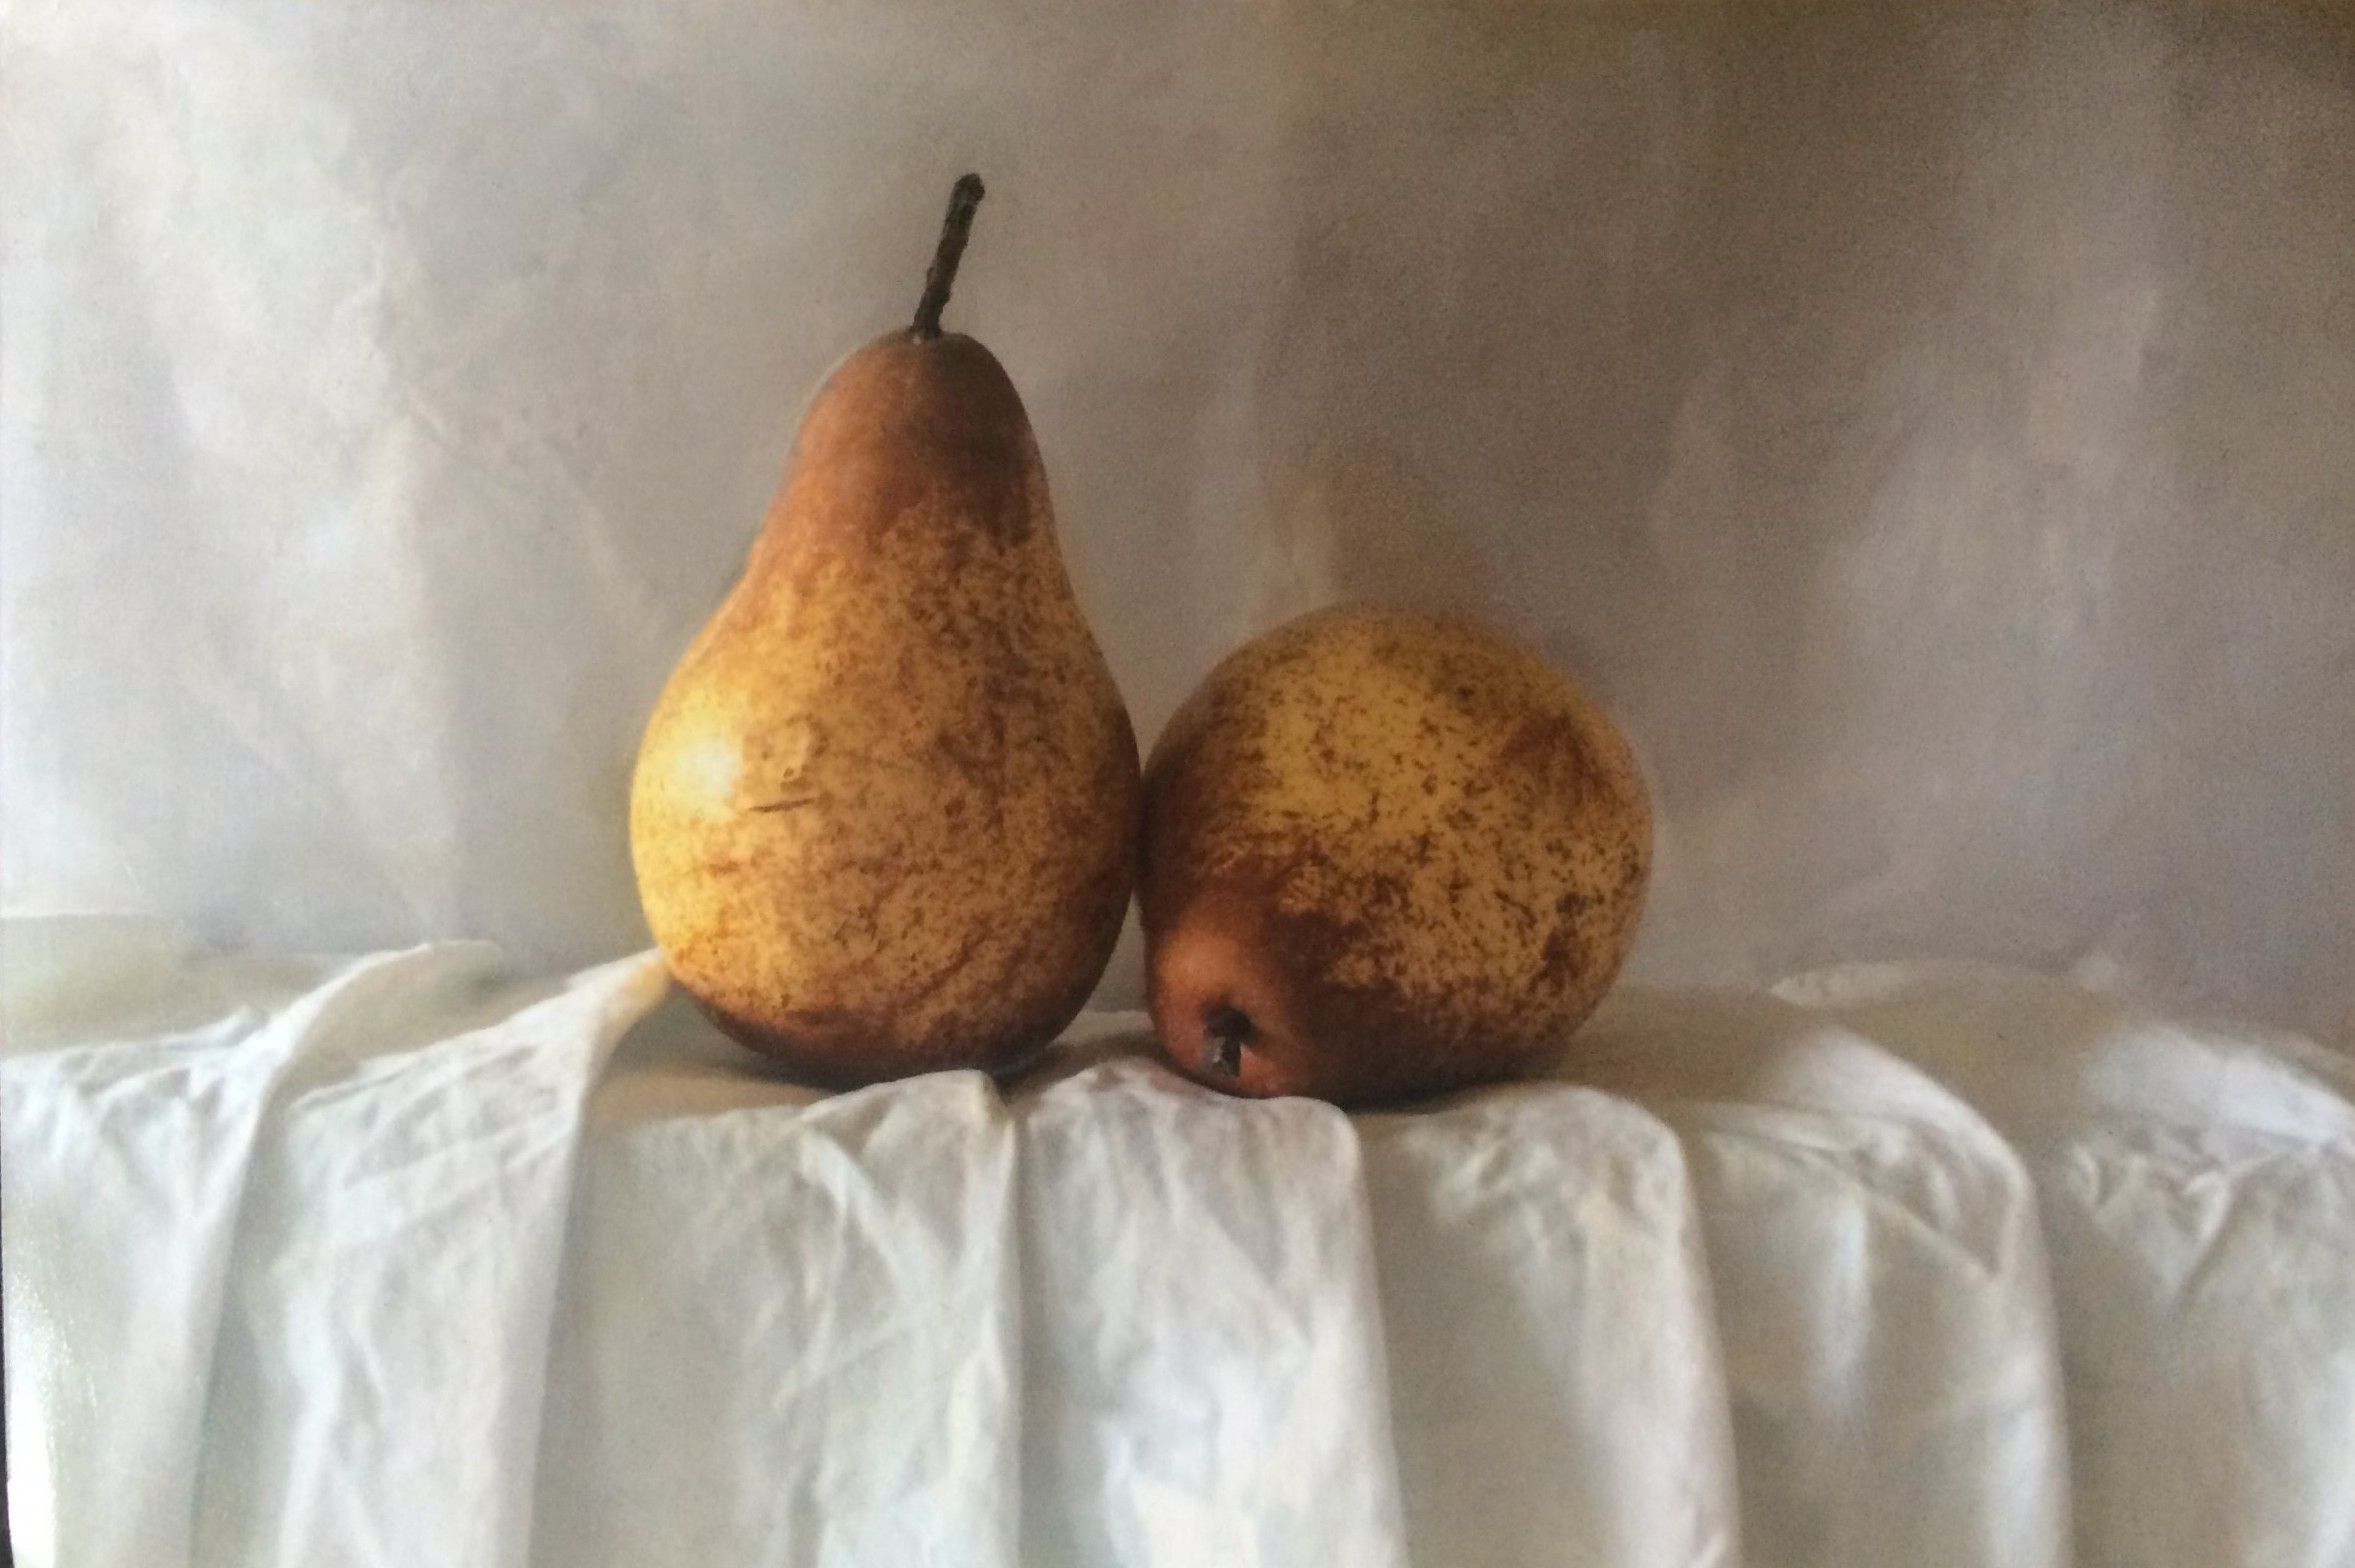 Pears by Kate Verrion